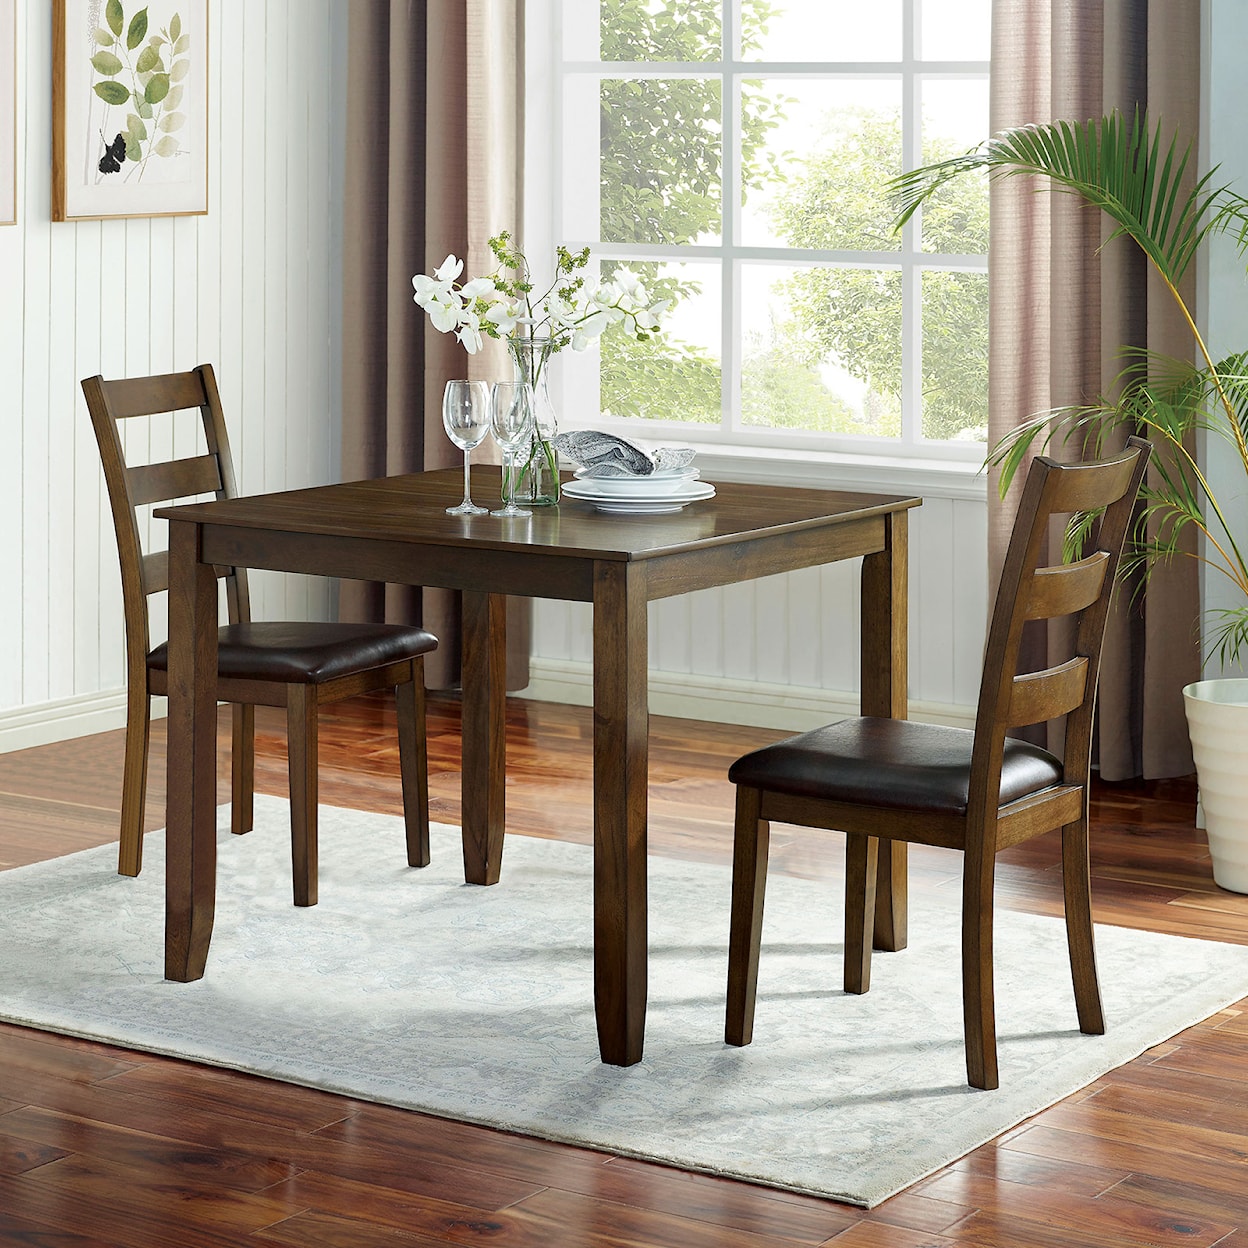 Furniture of America Gracefield 3 Pc. Dining Table Set